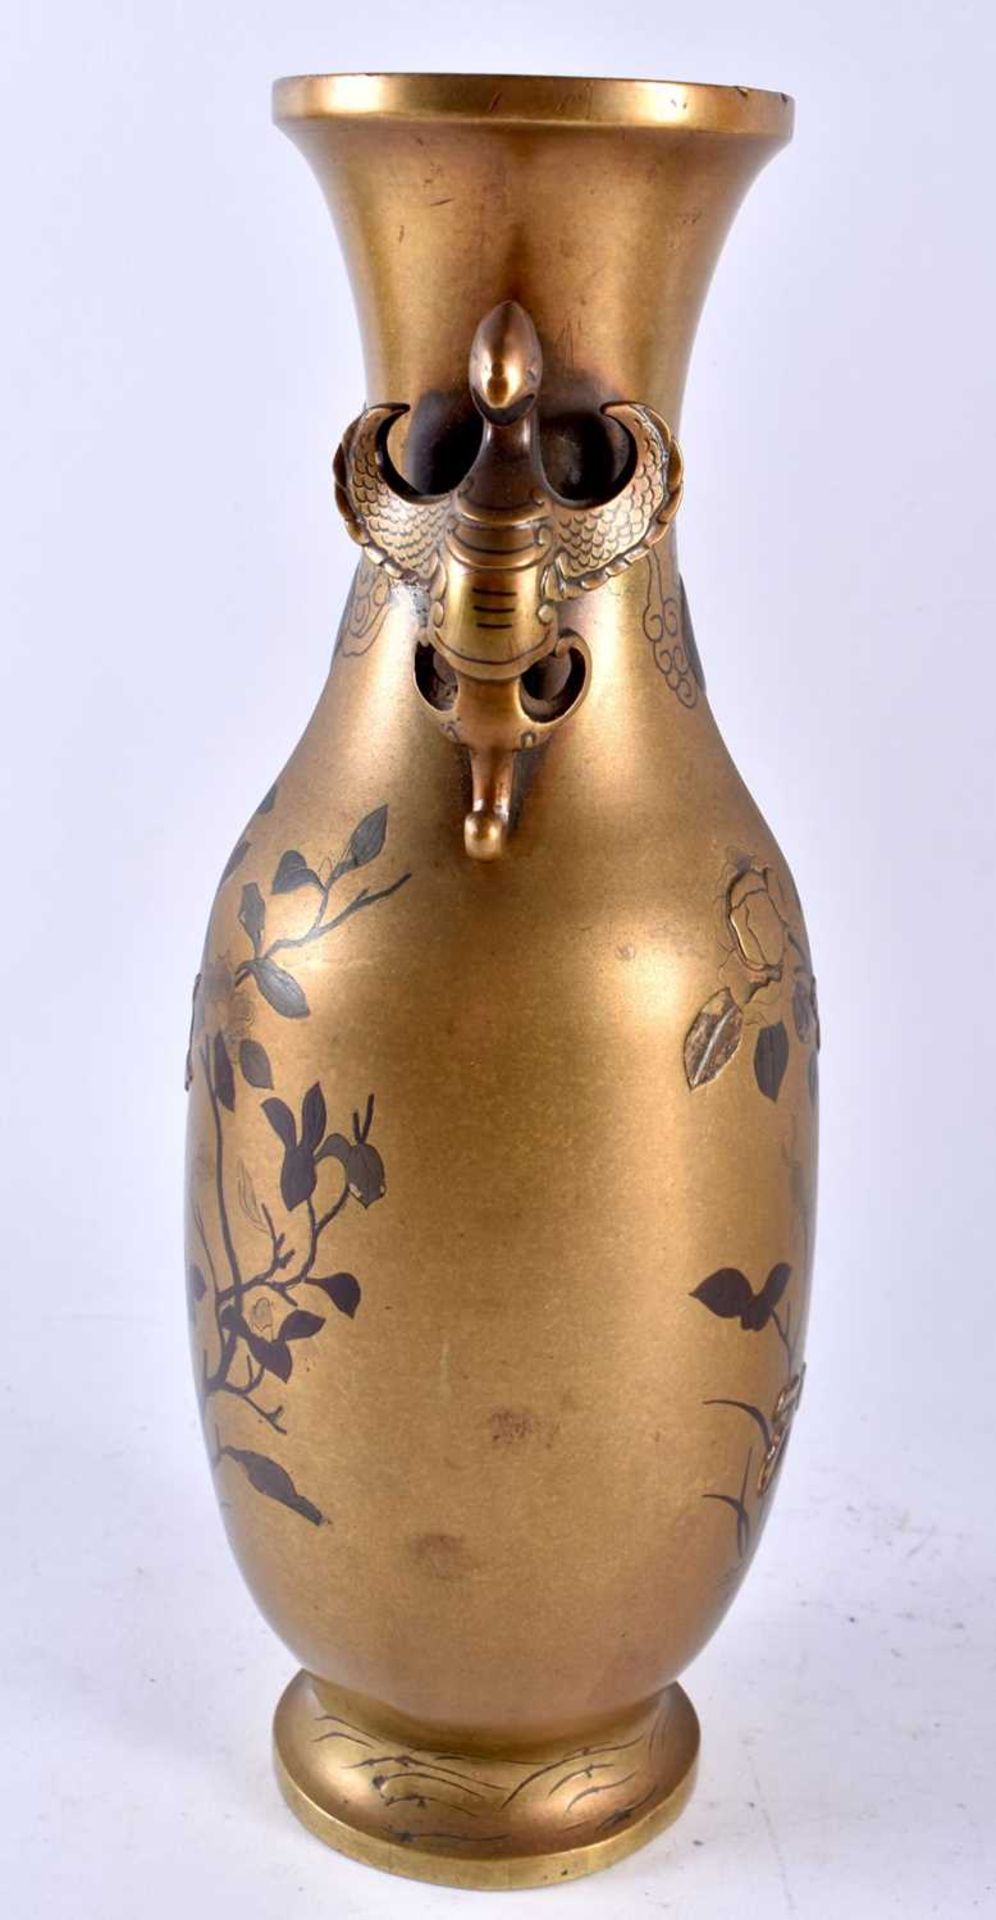 A 19TH CENTURY JAPANESE MEIJI PERIOD MIXED METAL BRONZE VASE decorated with insects and foliage. - Image 4 of 8